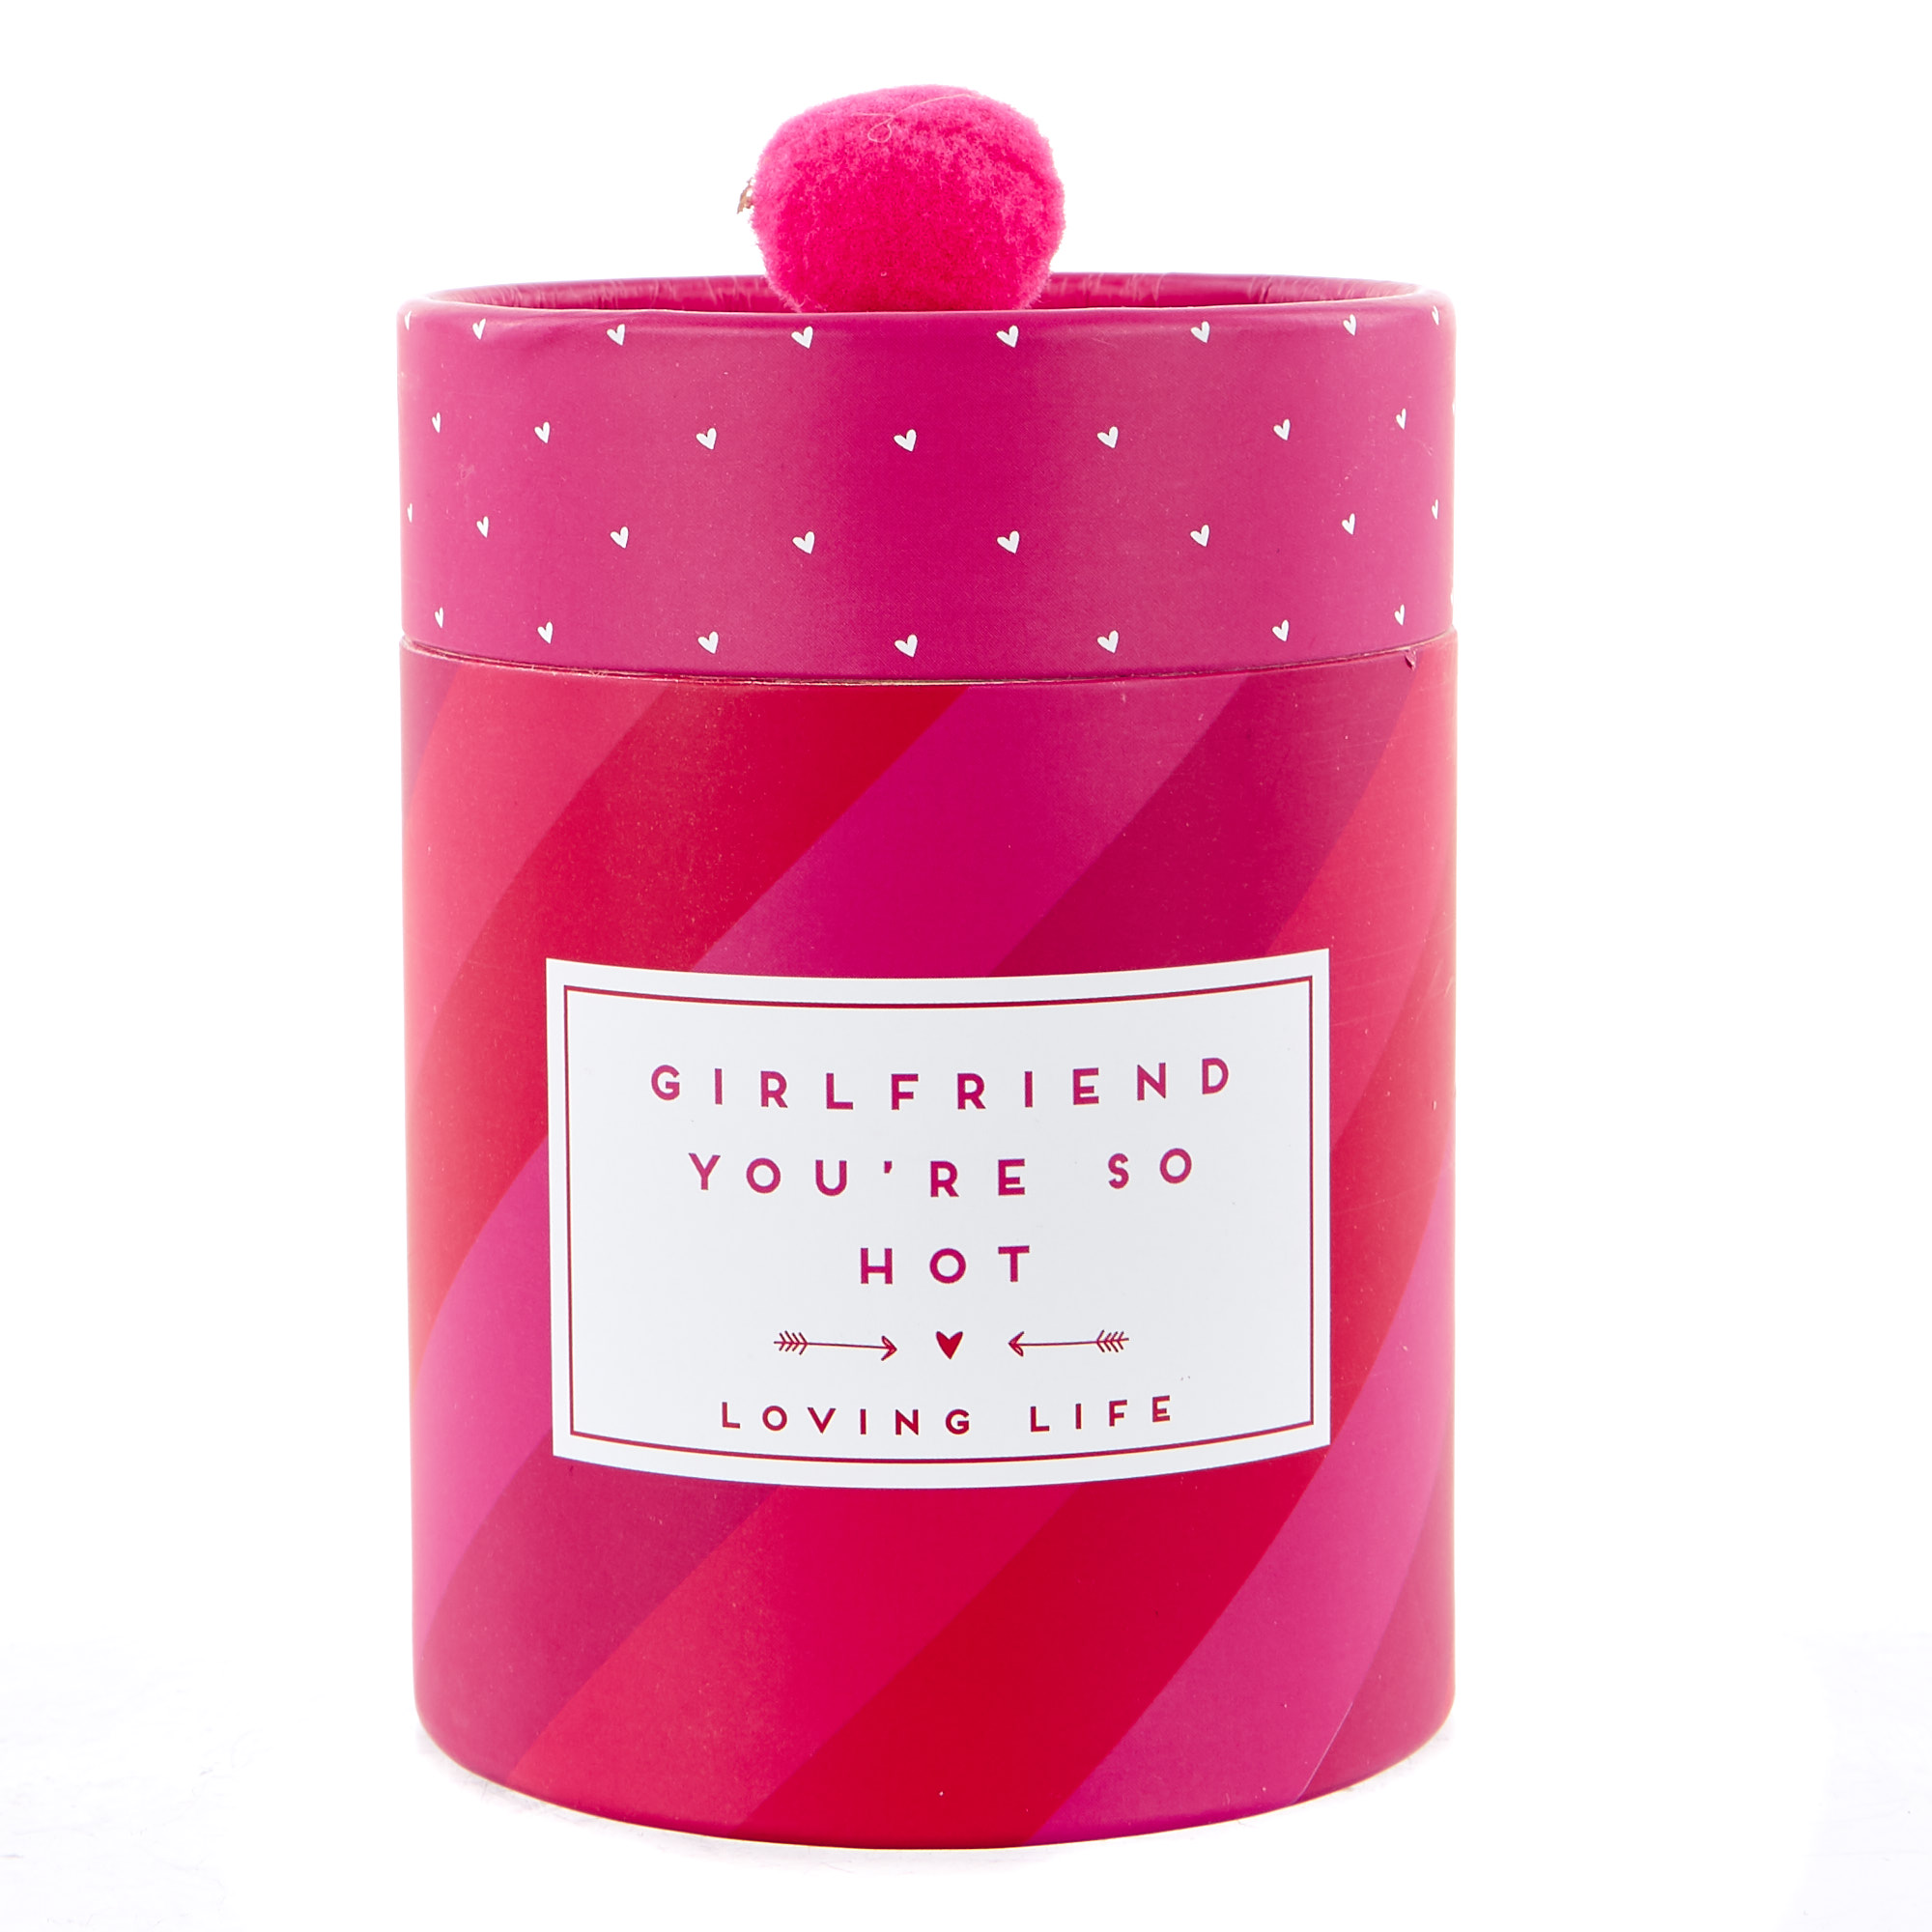 Vanilla Scented Candle - Girlfriend